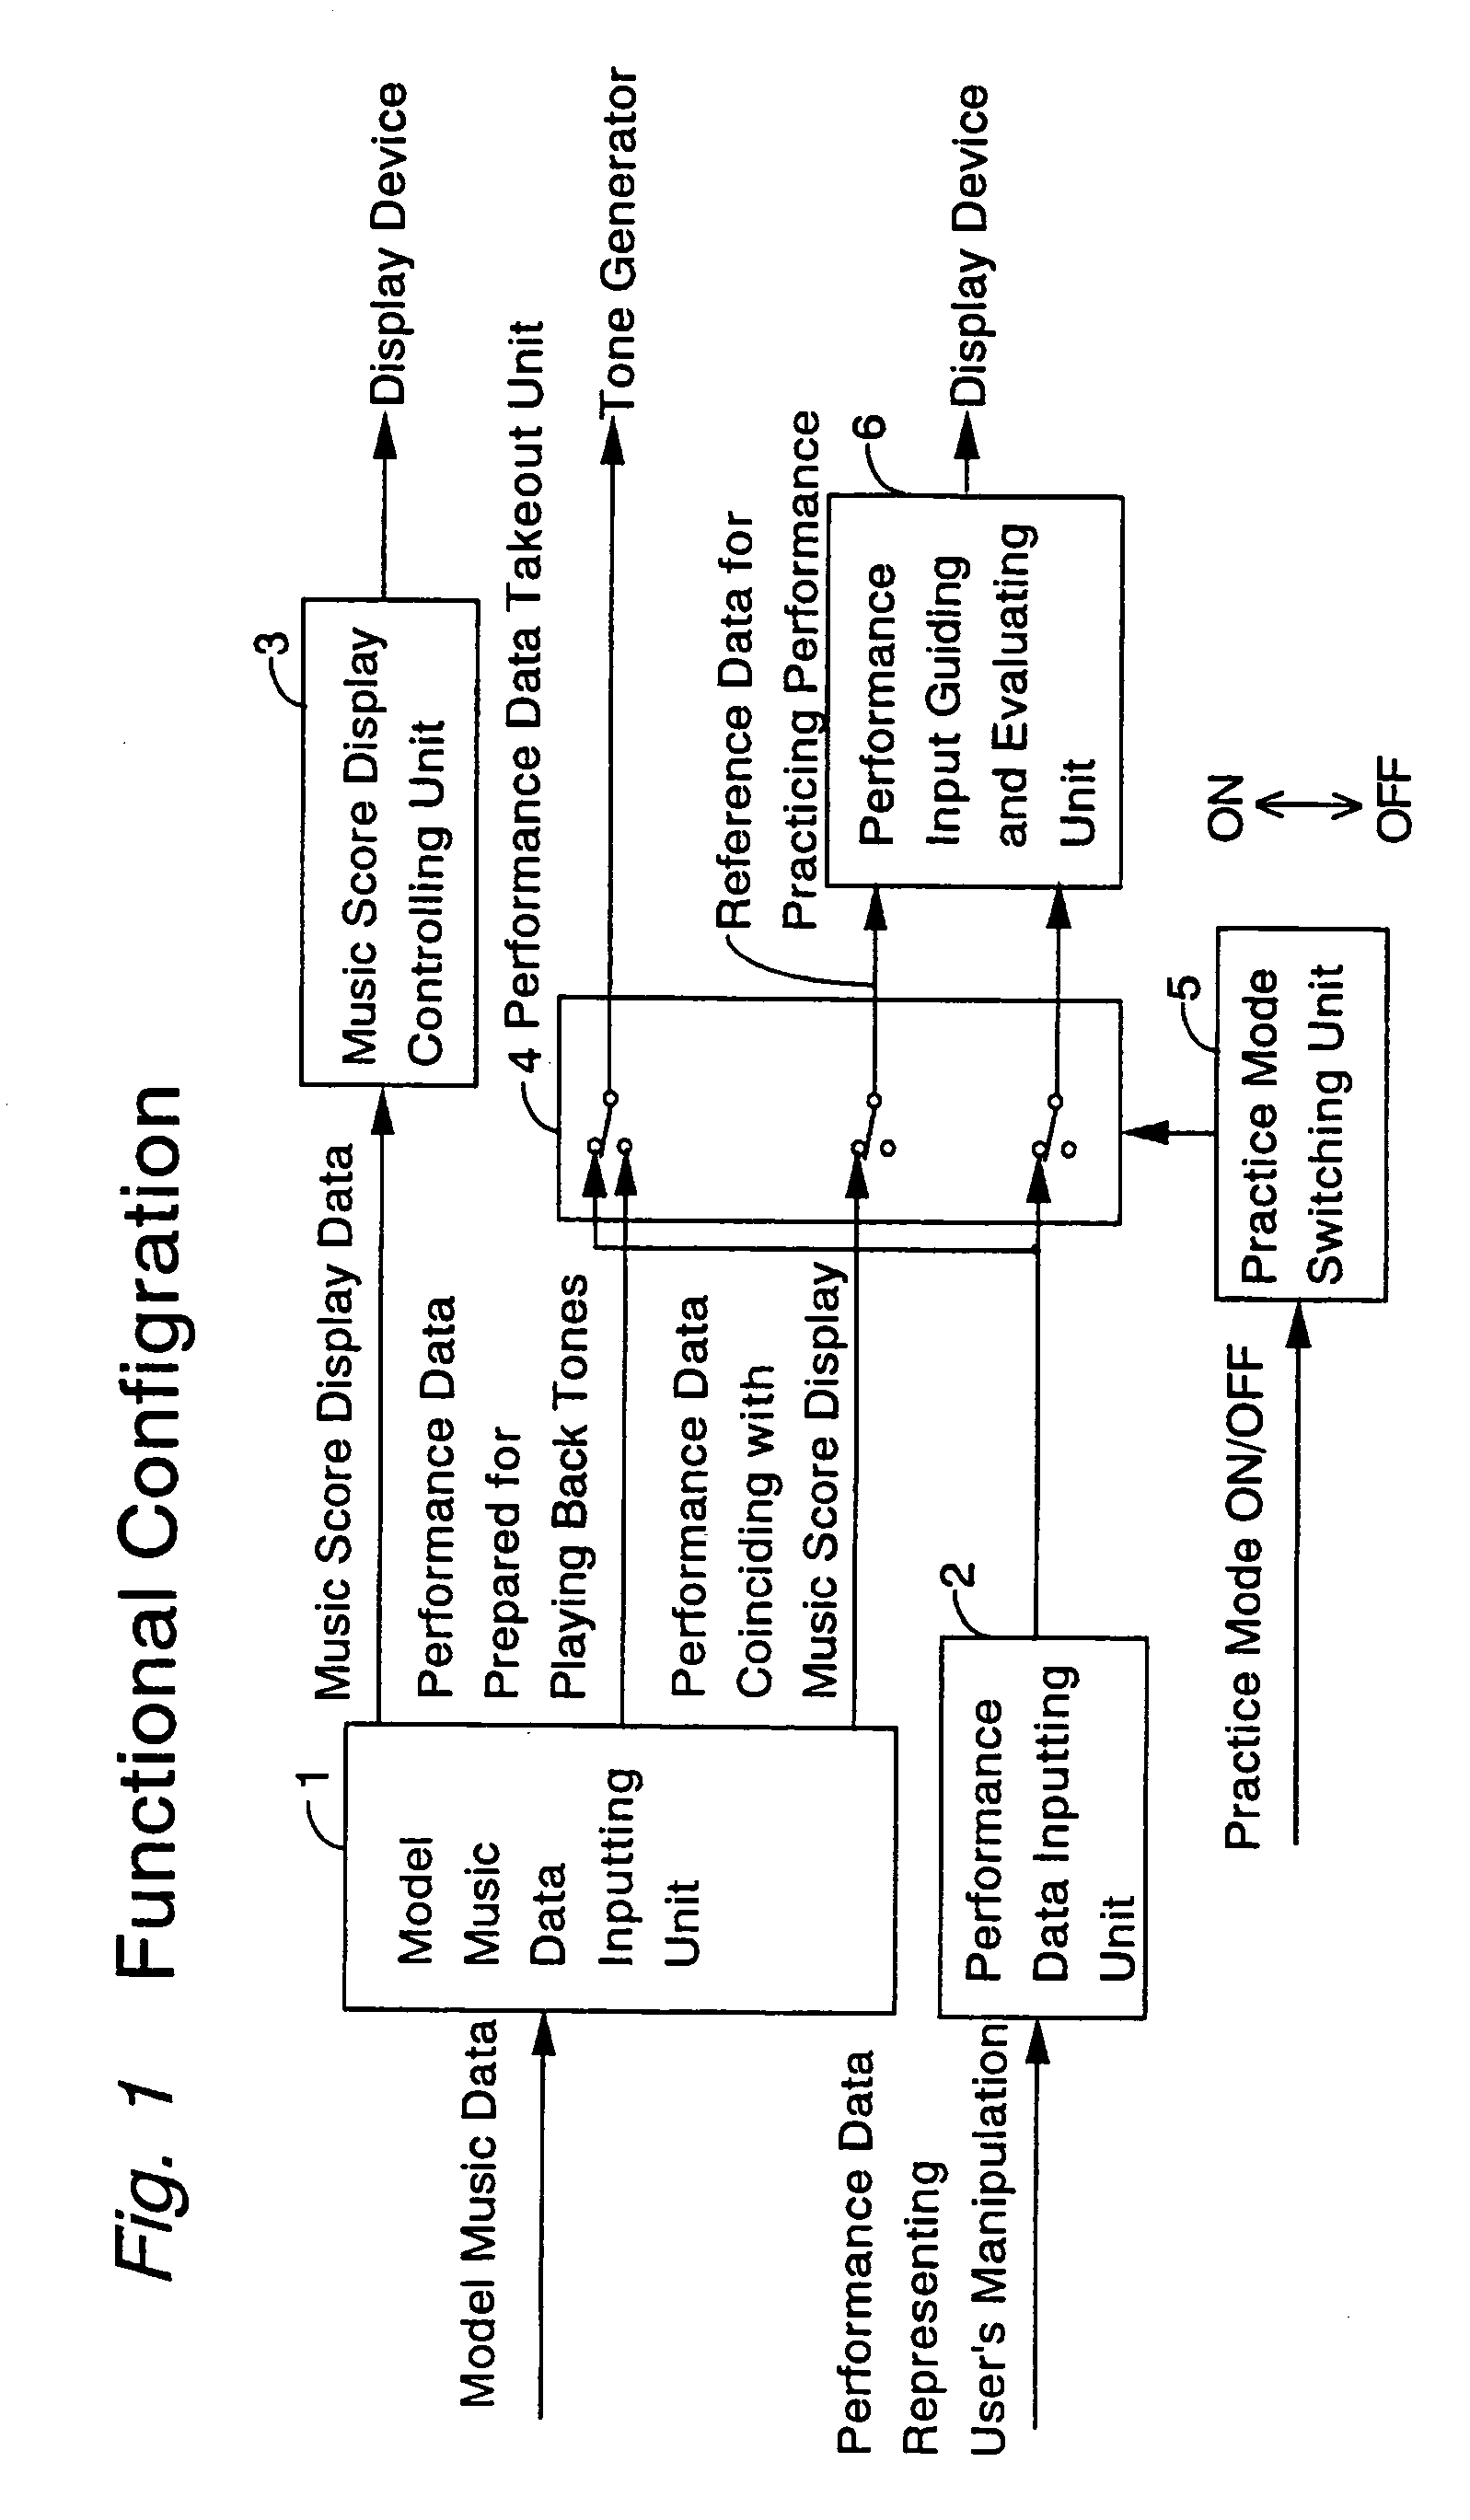 Apparatus and computer program for practicing musical instrument